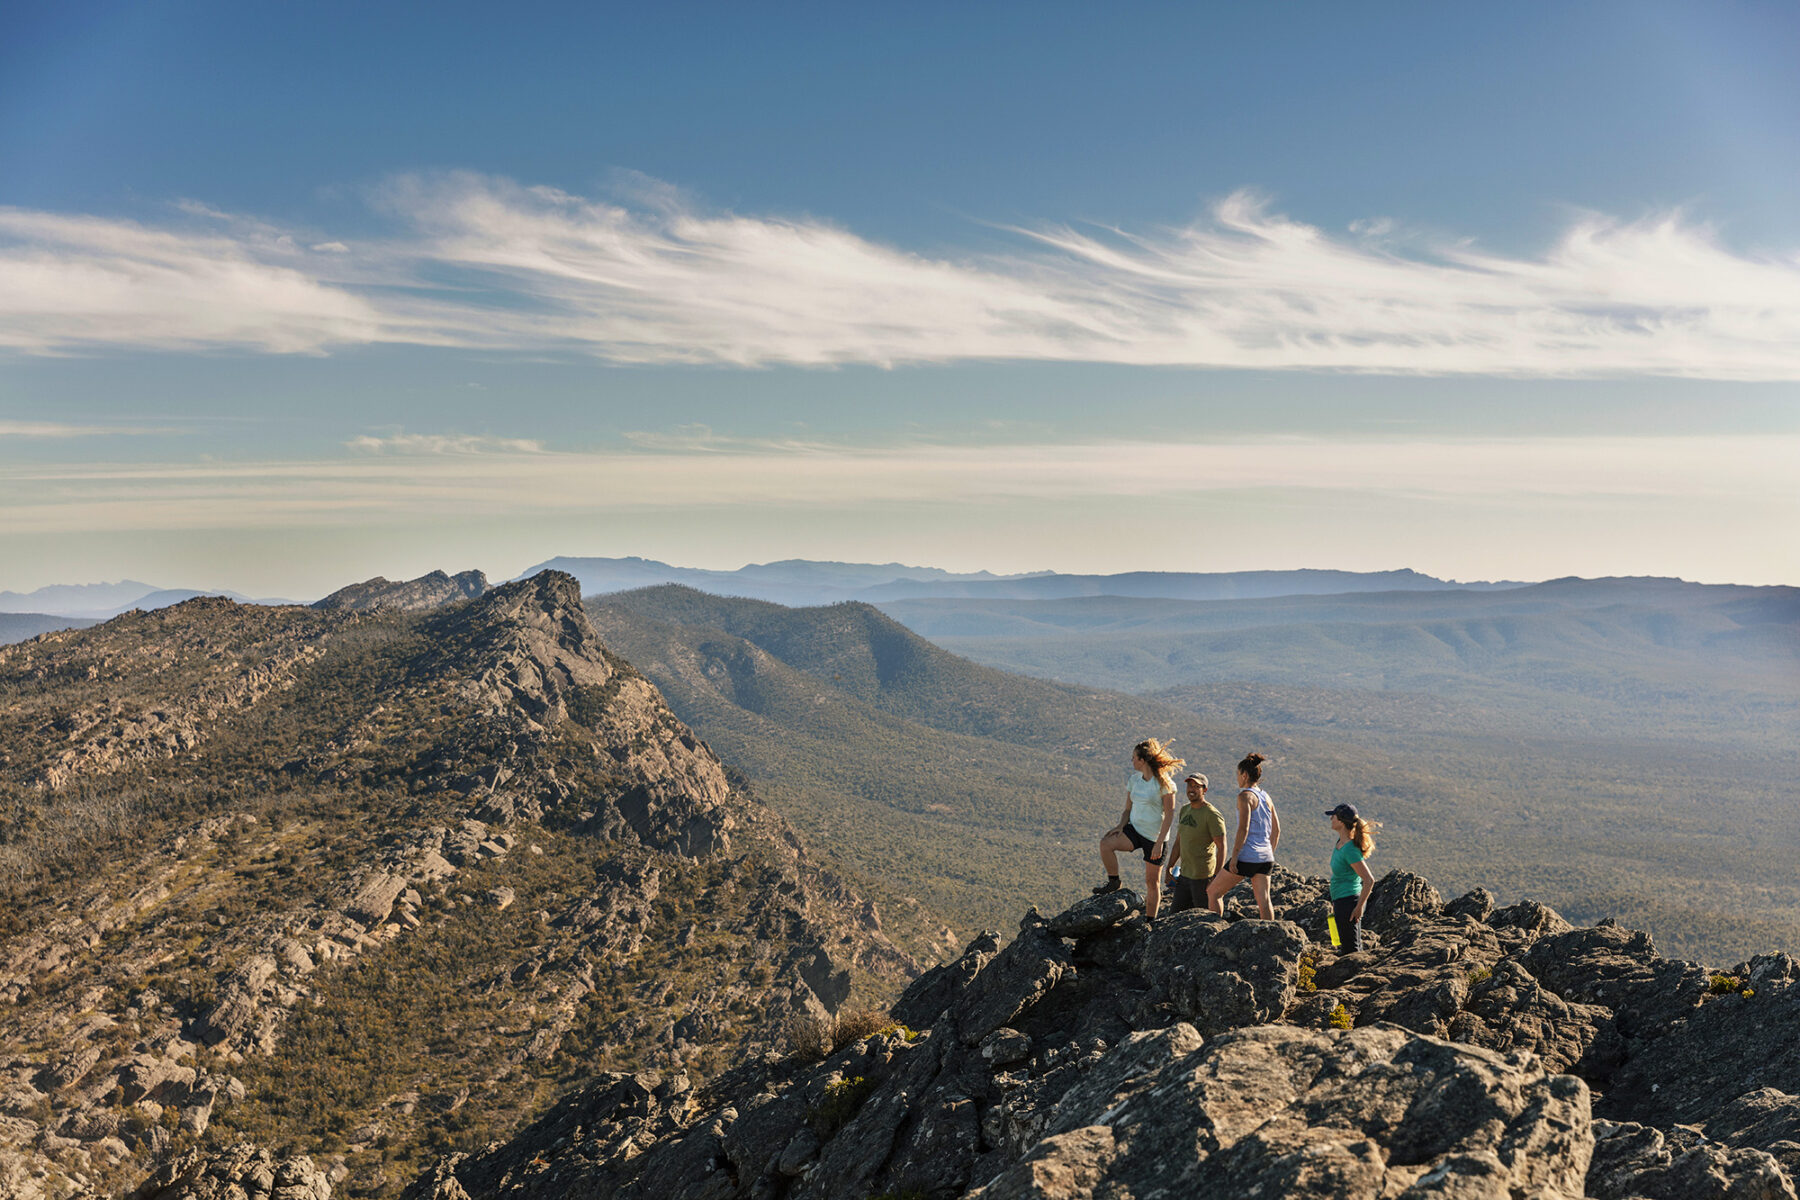 Embark on a Scenic Journey through the Grampians National Park